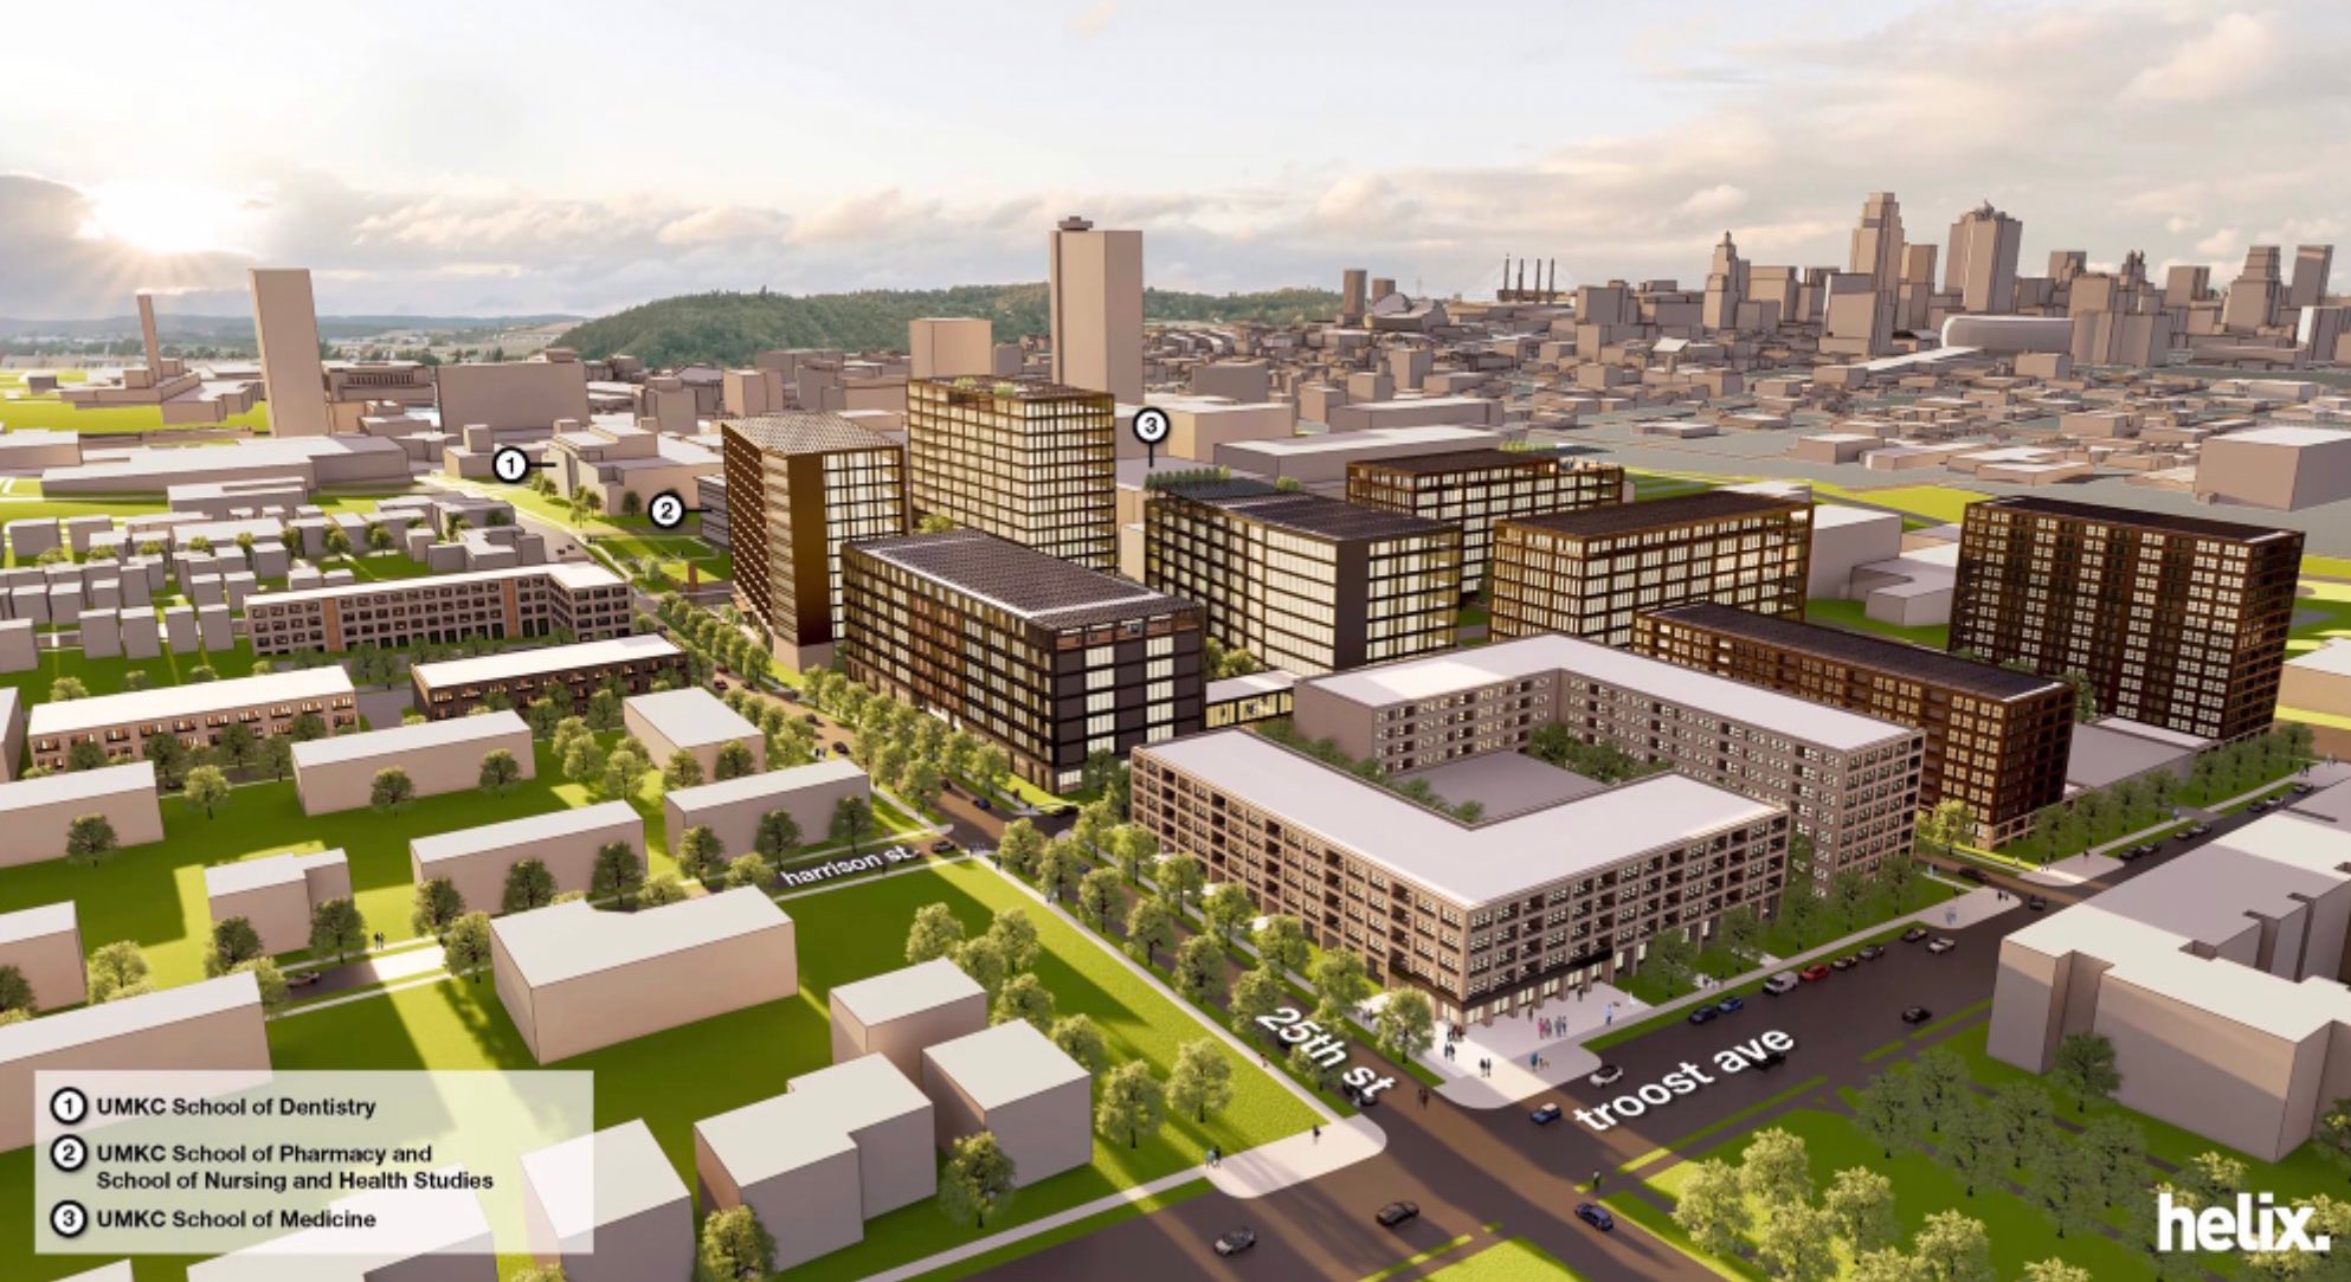 a rendering of the UMKC Health Sciences District with the new addition of the Health Innovation and Delivery Building